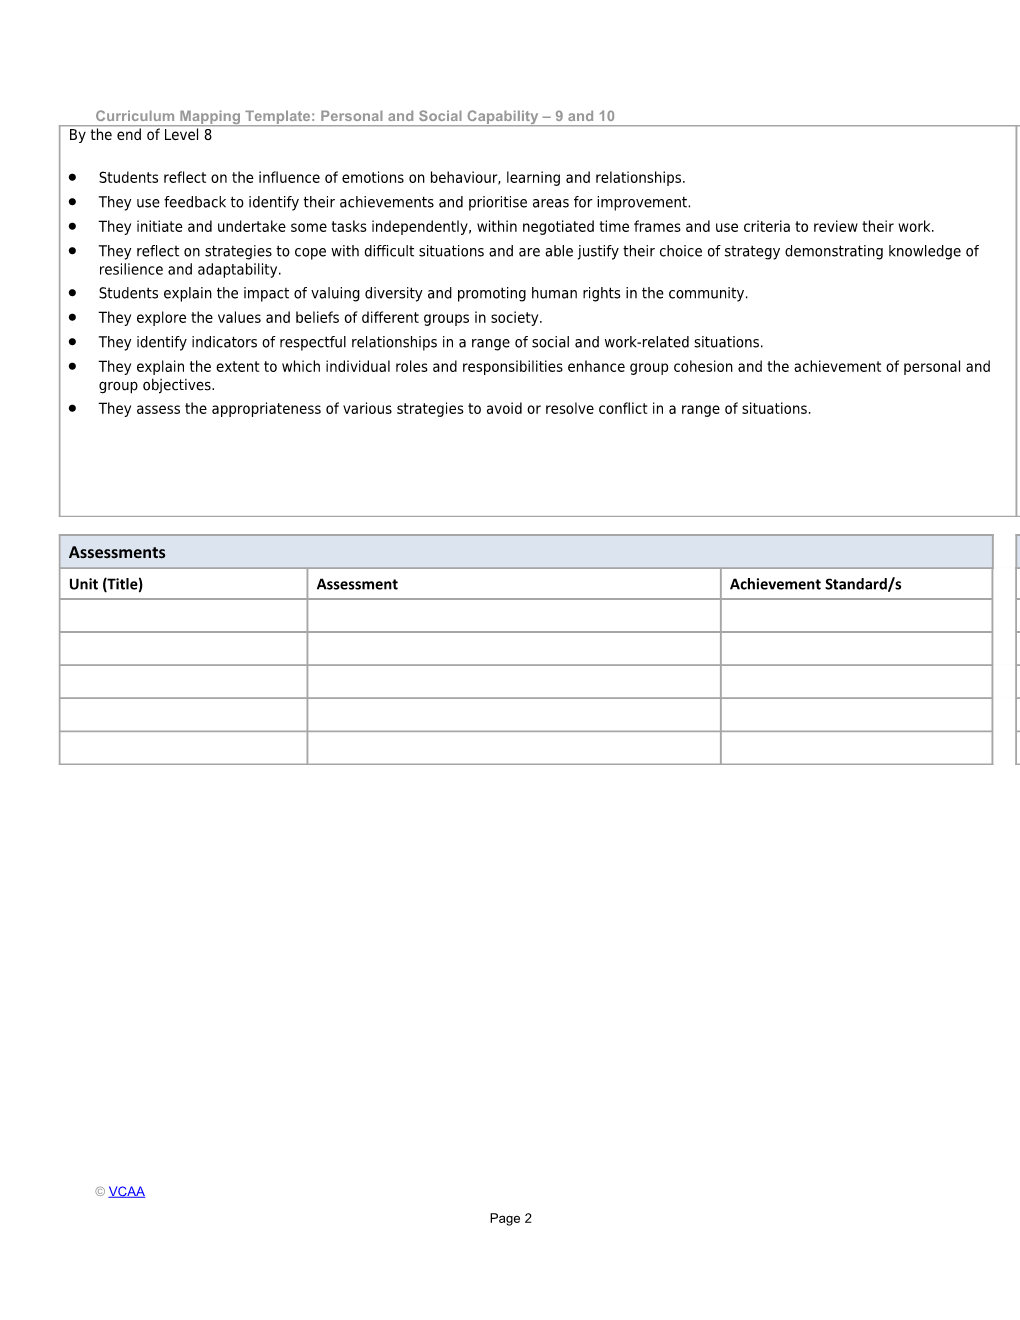 Curriculum Mapping Template: Personal and Social Capability 9 and 10